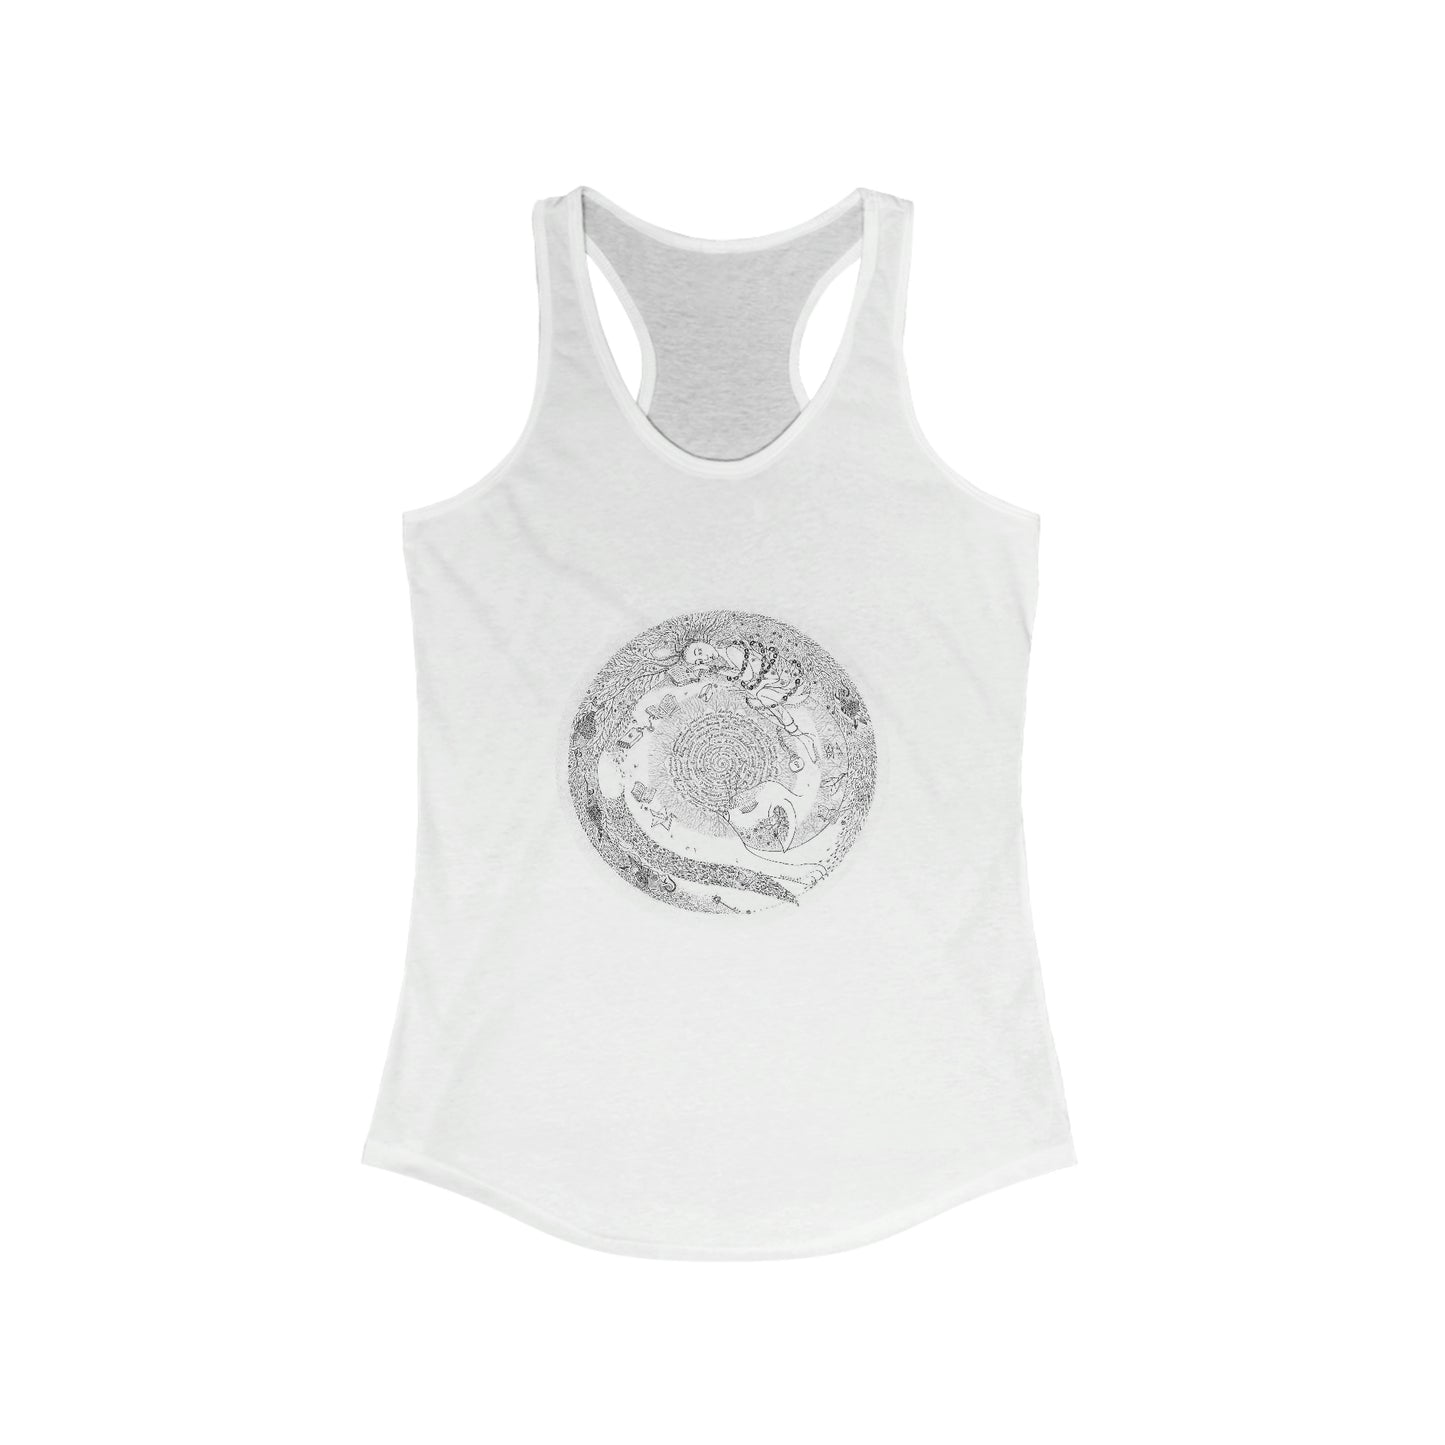 Chinese Zodiac Sign Tank Top (Cat) Limited Edition